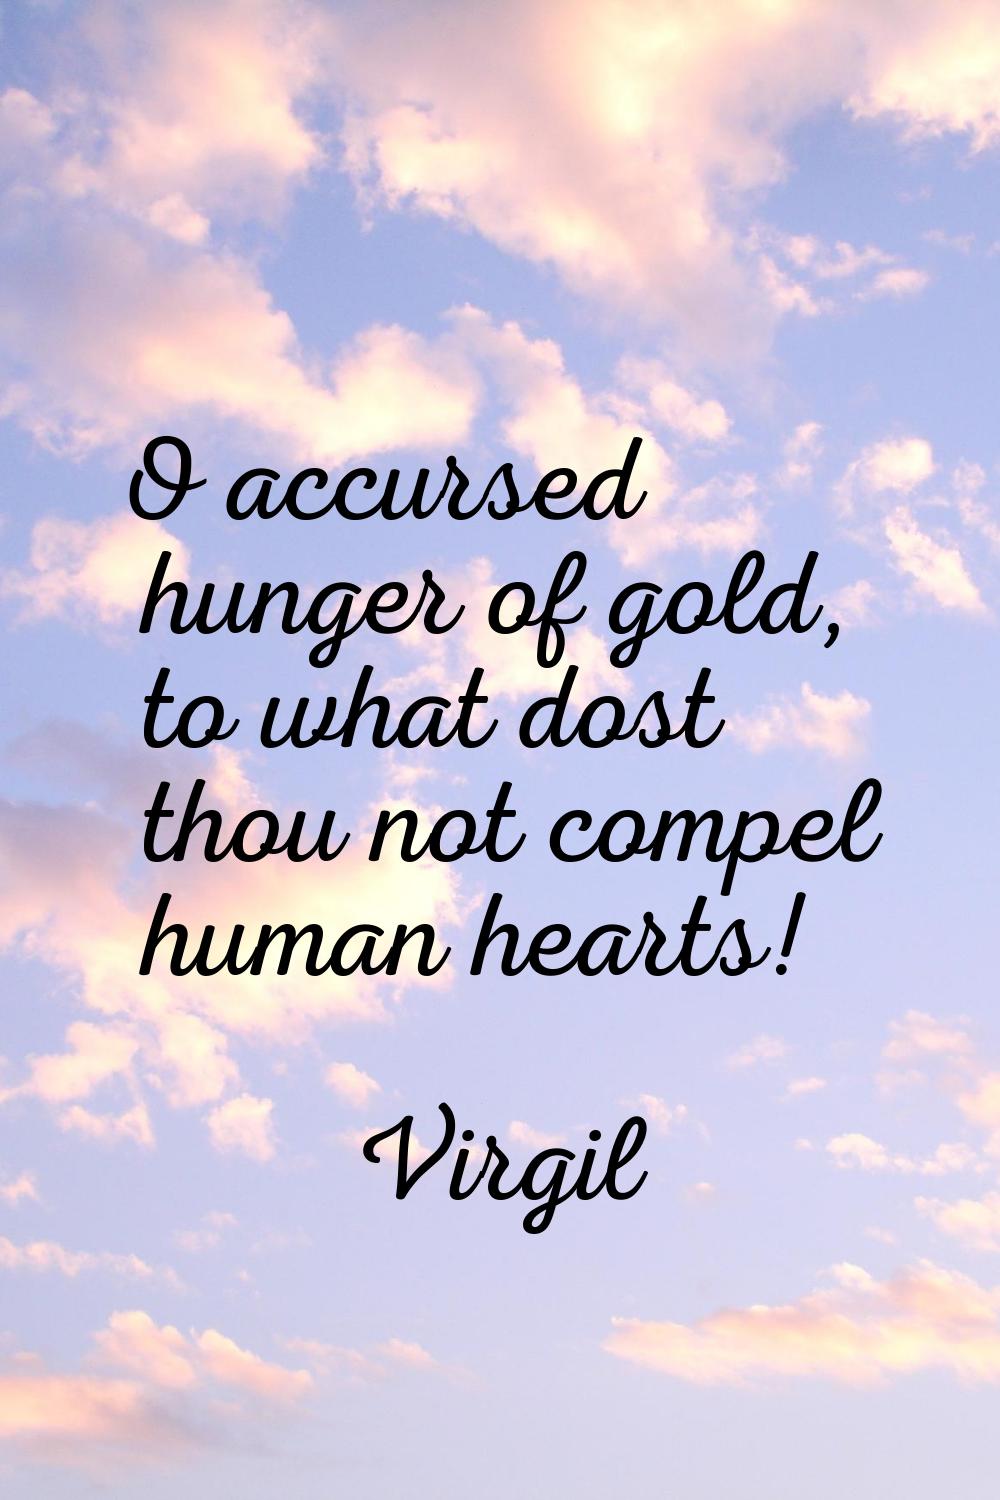 O accursed hunger of gold, to what dost thou not compel human hearts!